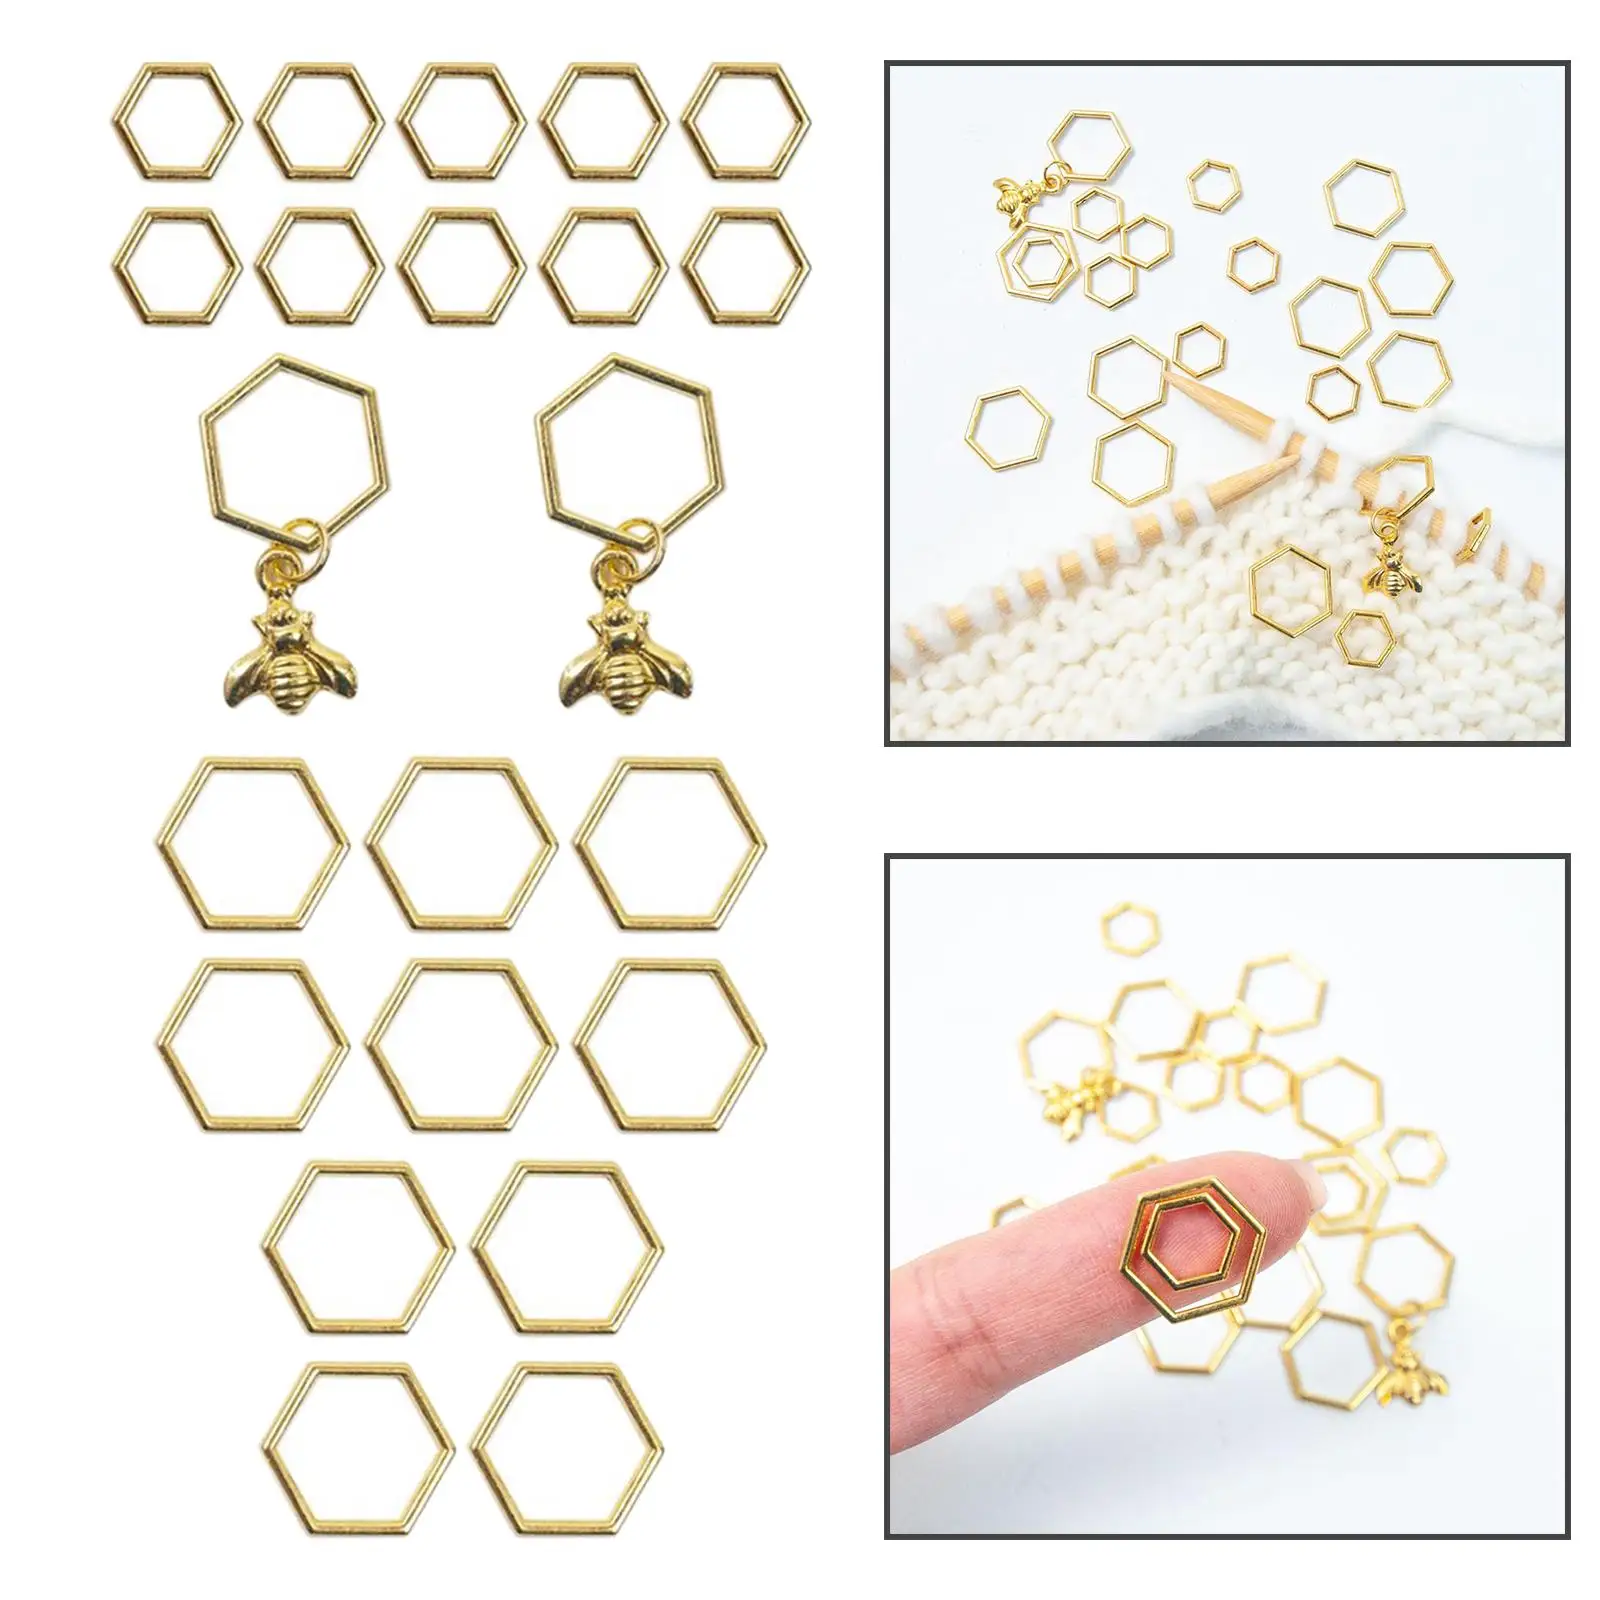 Hexagon Ring Stitch Markers Art Golden Bee Shape Craft Handmade DIY Knitting Stitch Marker for Sweater Scarf Weaving Tool